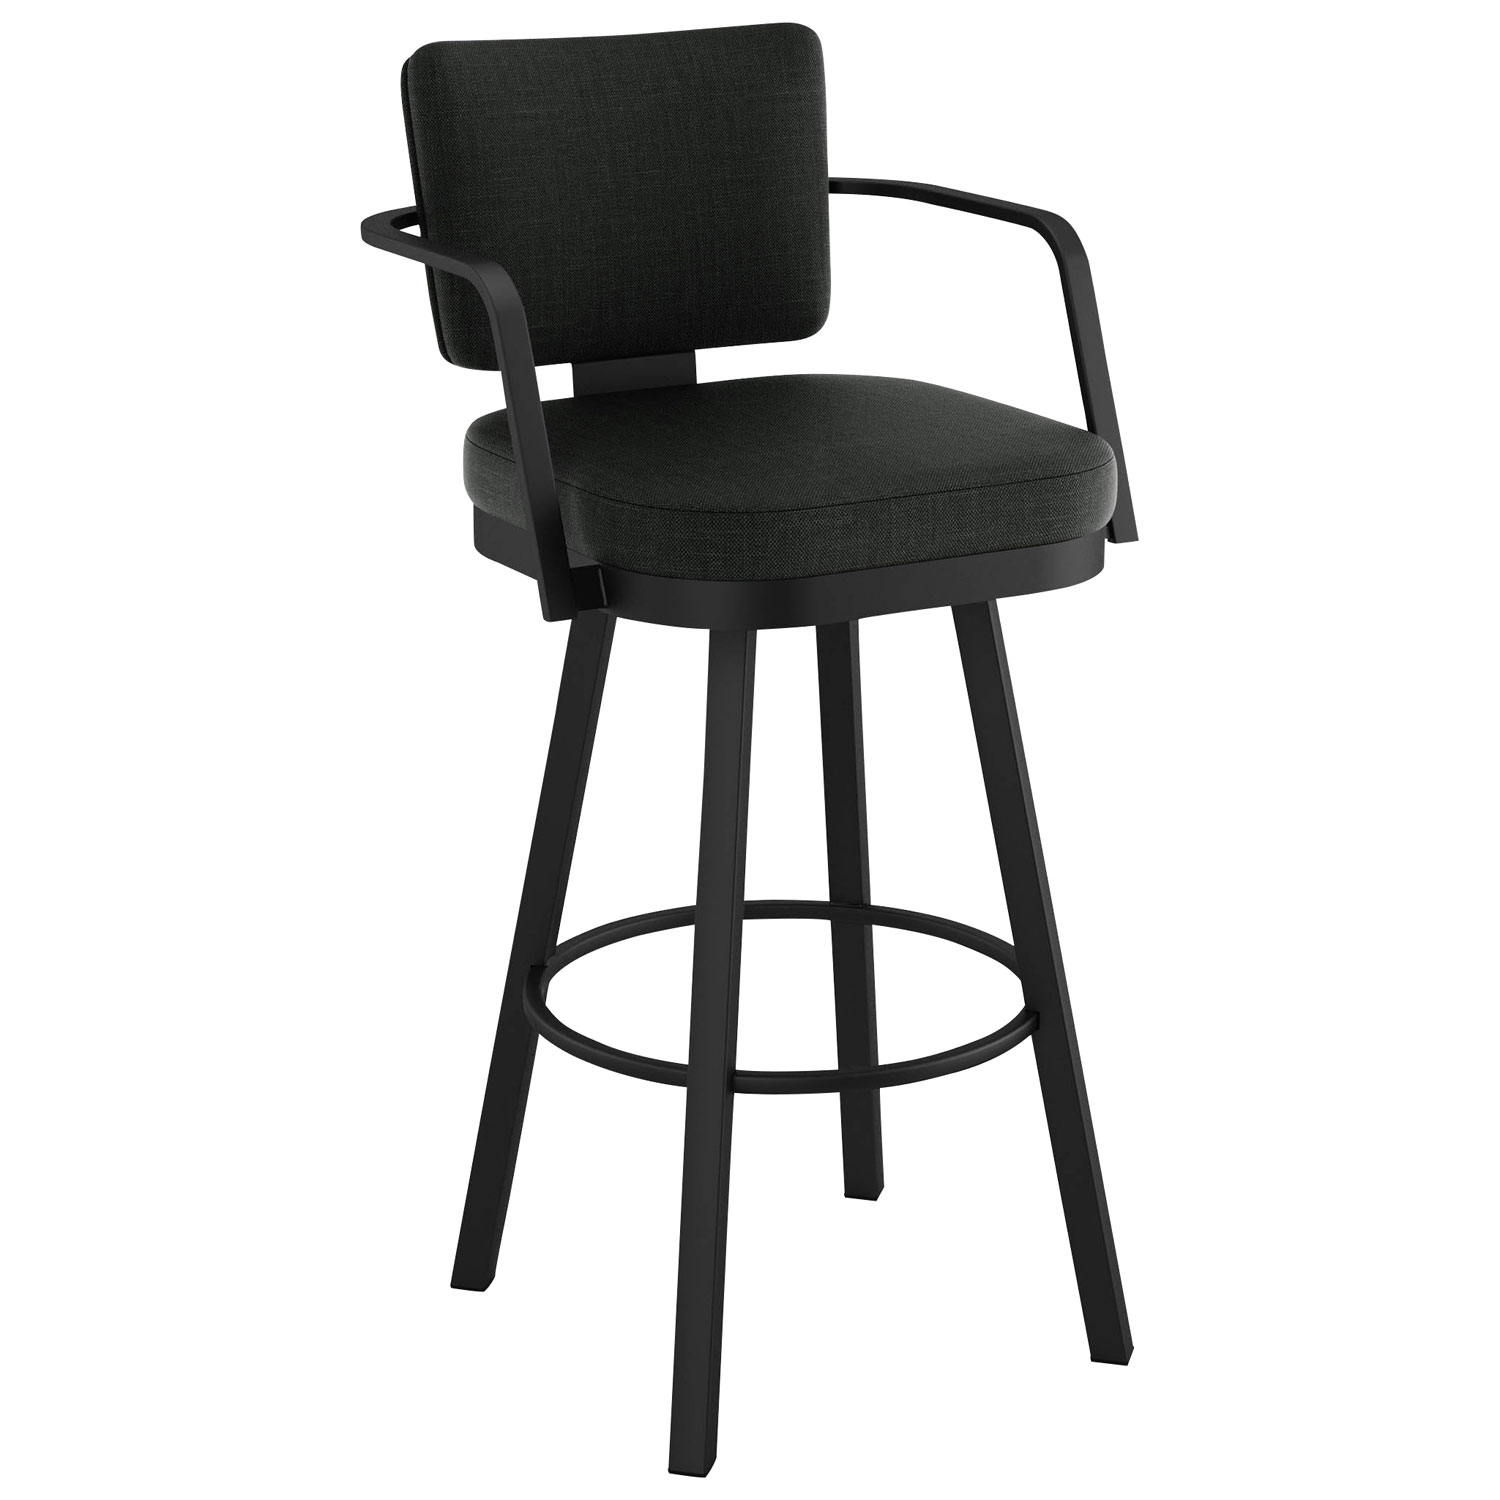 Thea Rustic Country Counter Height Barstool - Black/Black